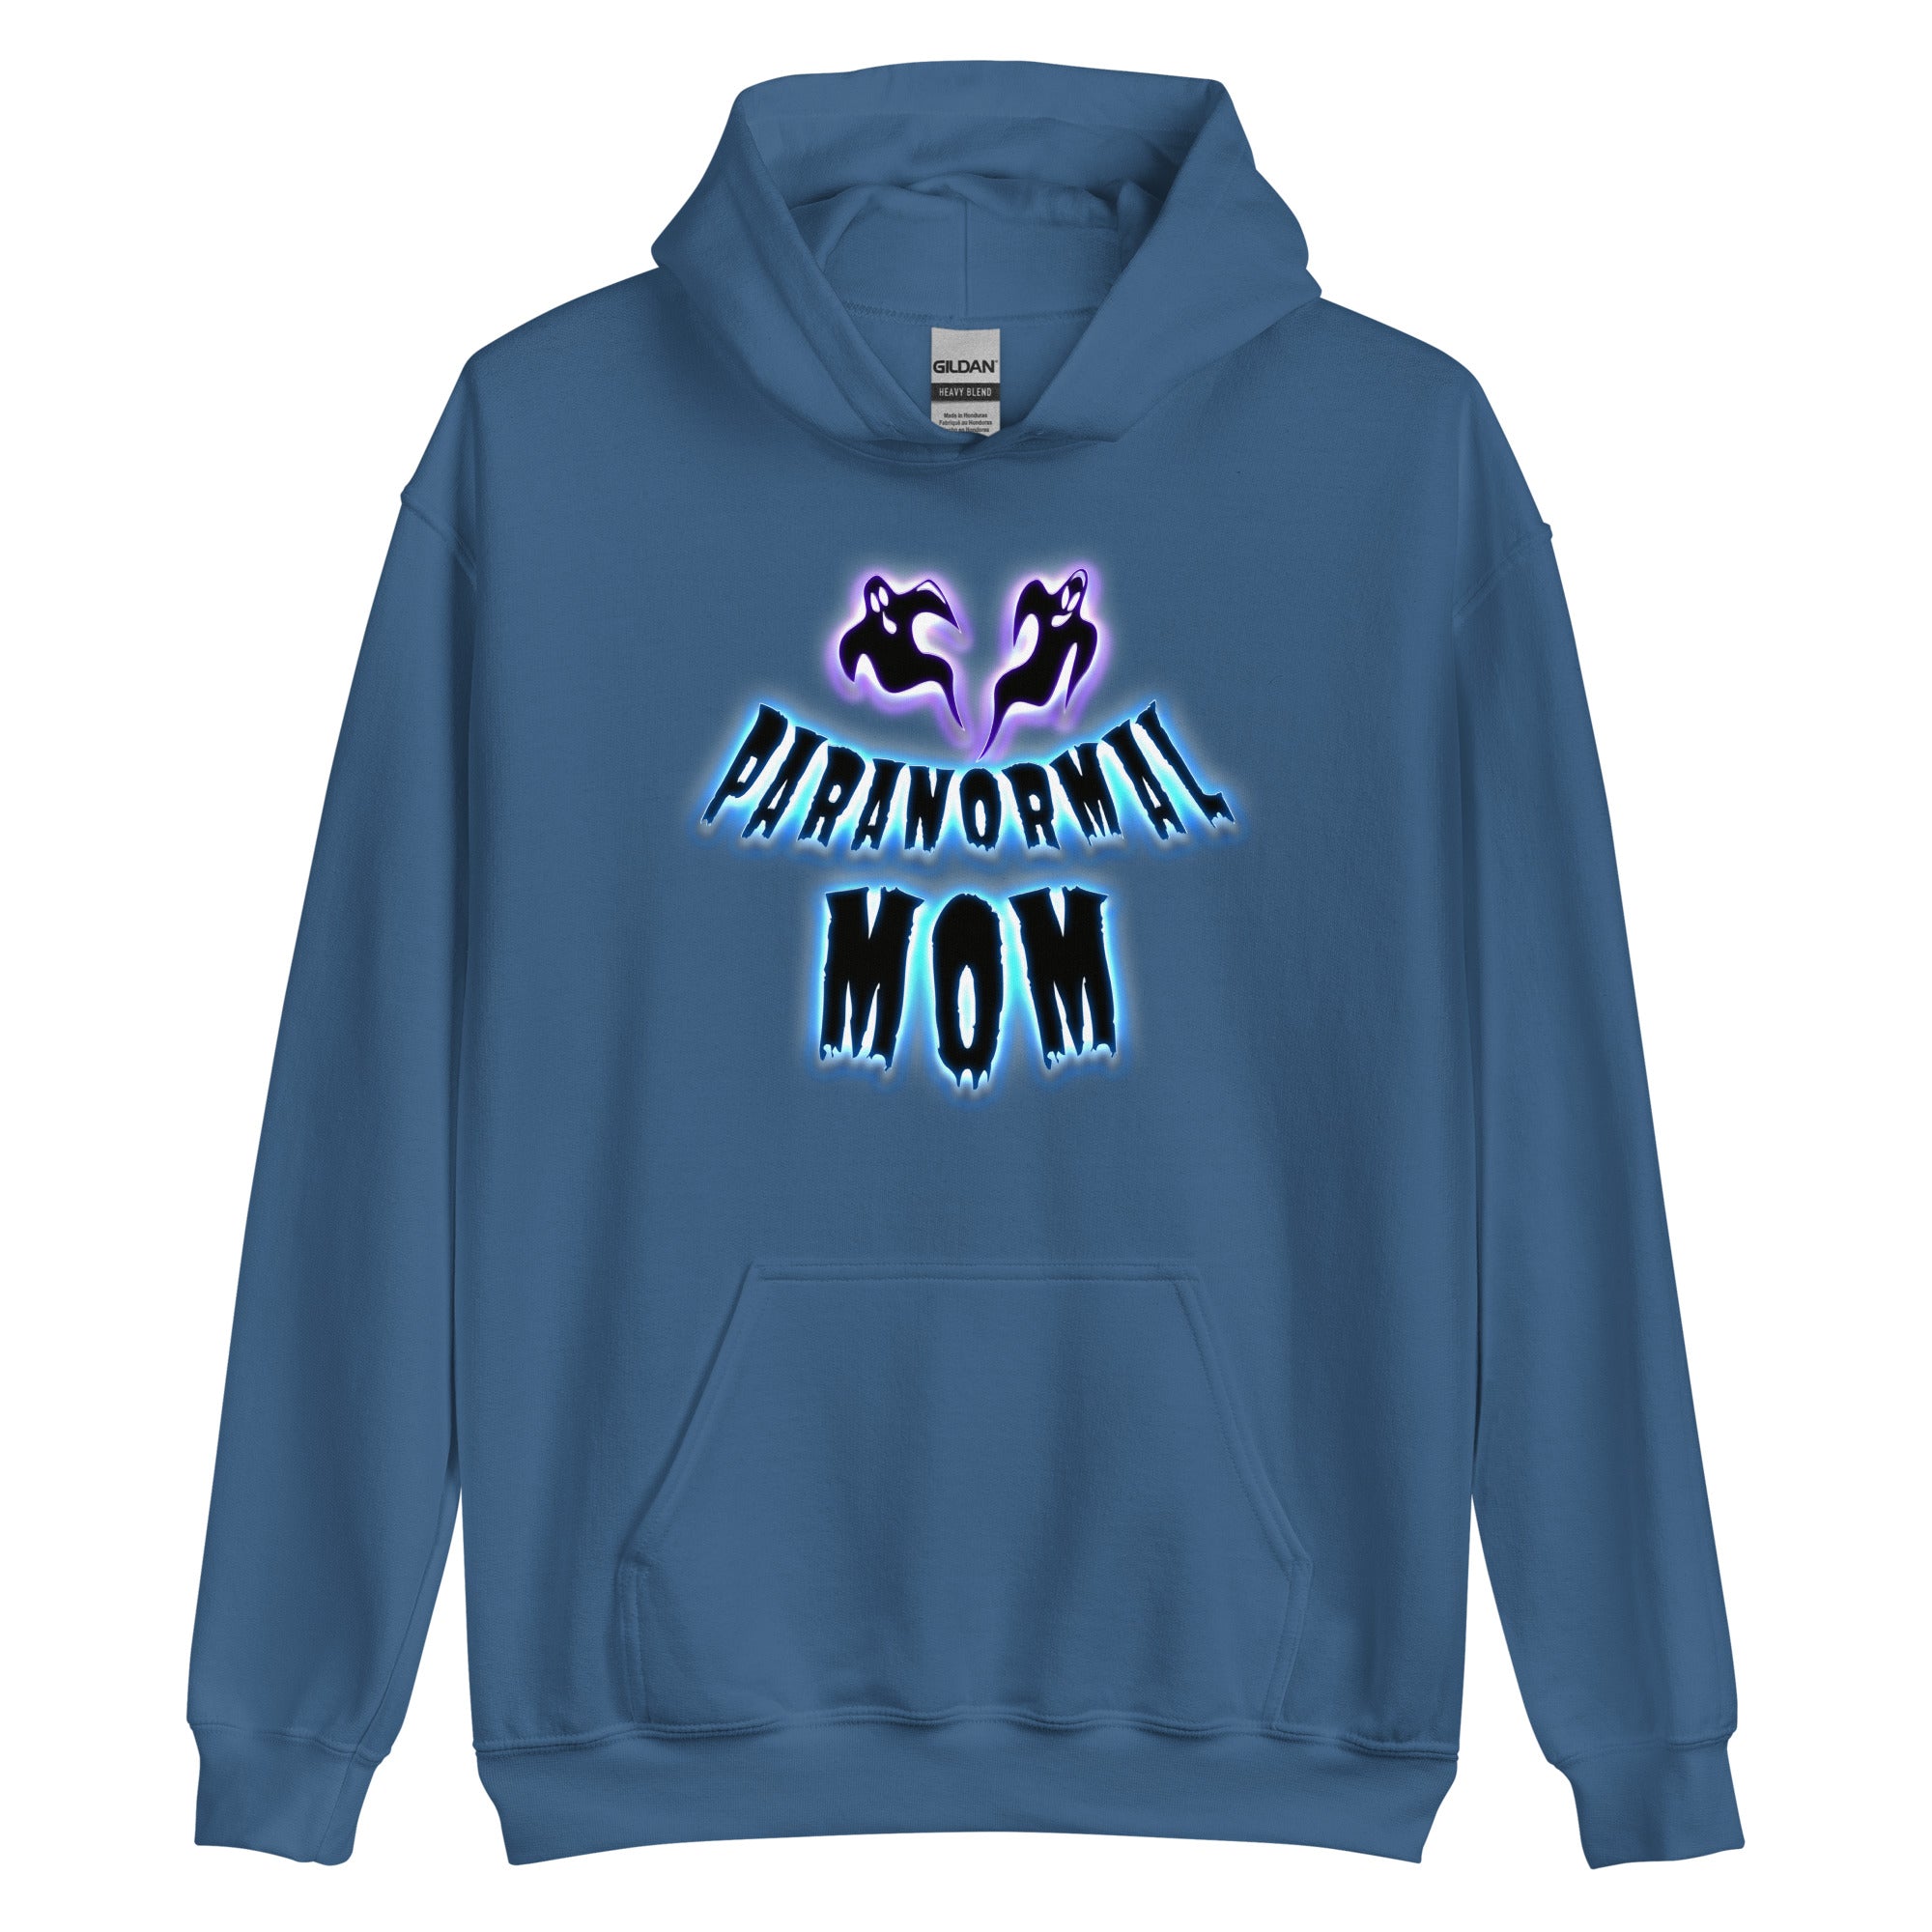 Paranormal Ghost Mom Poltergeist Mother's Day Pullover Hoodie Sweatshirt